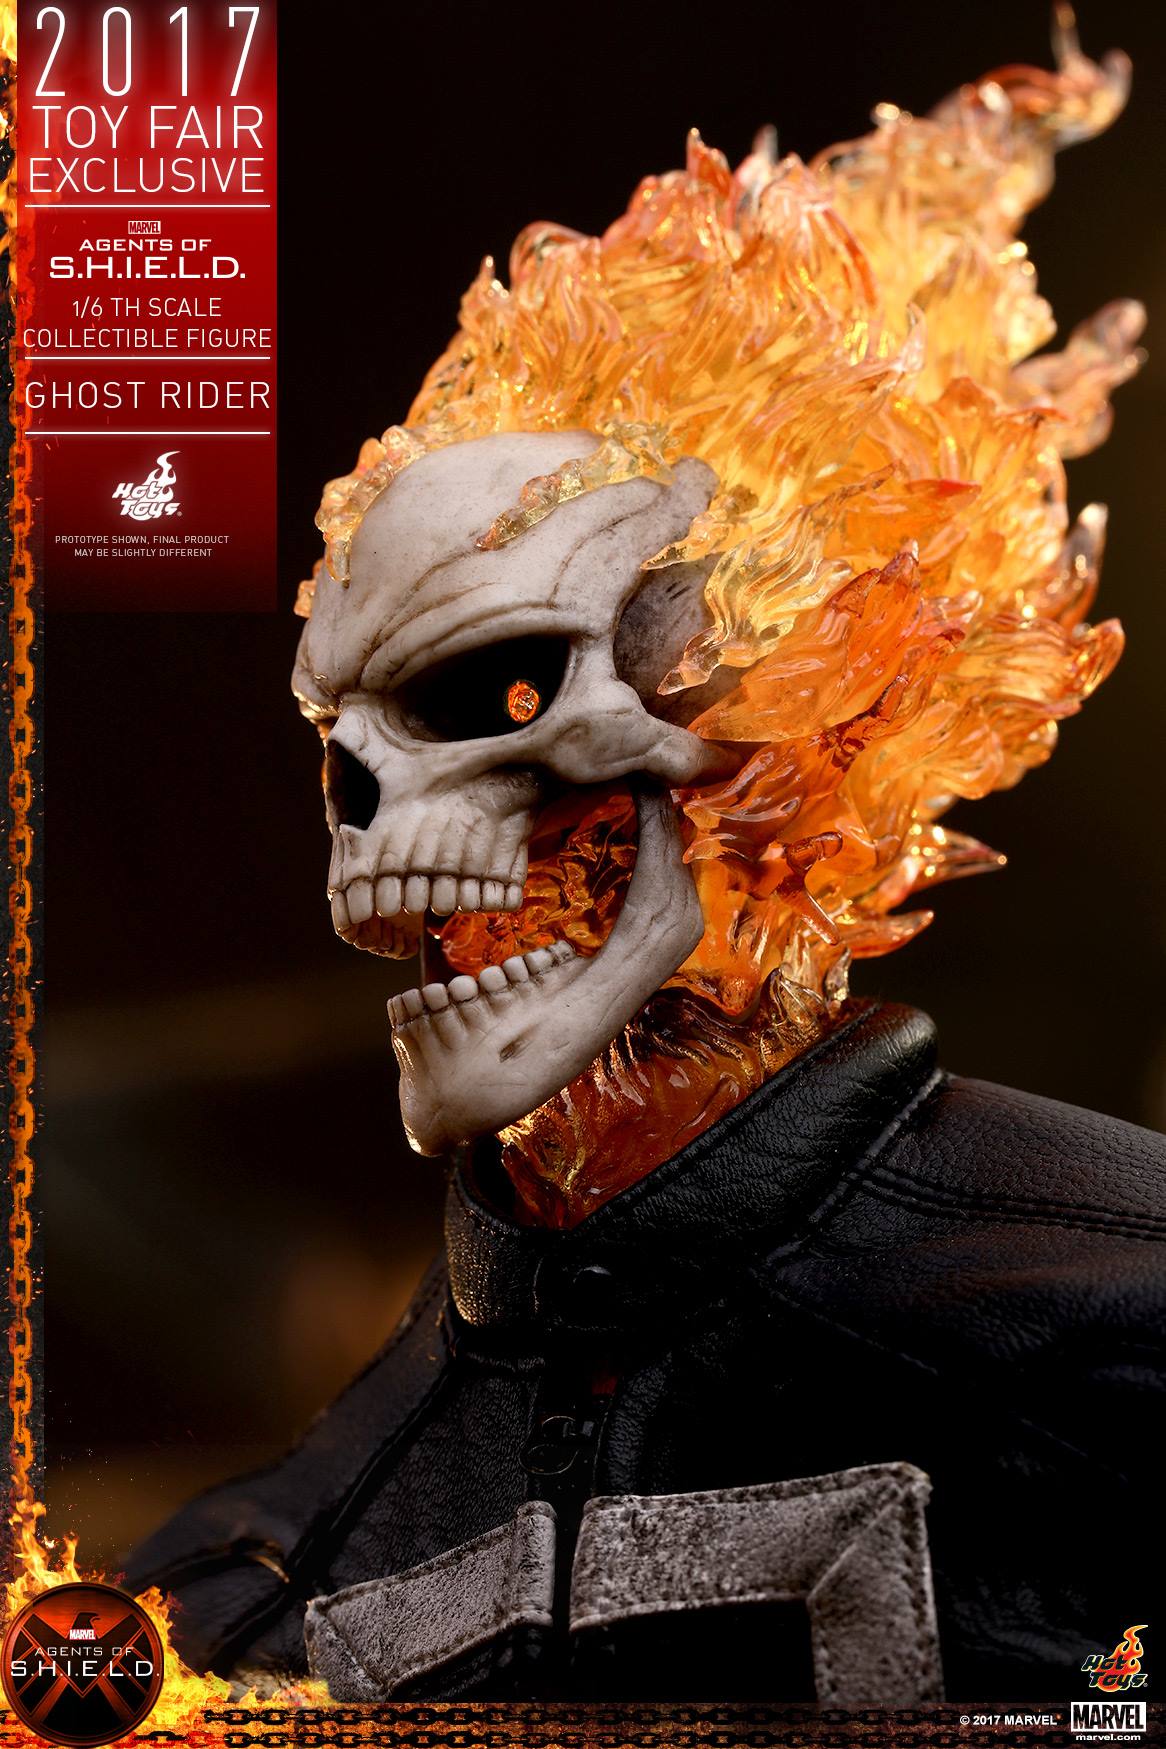 Authentic Hot Toys Agents of S.H.I.E.L.D Ghost Rider Cosbaby Marvel Johnny Blaze 